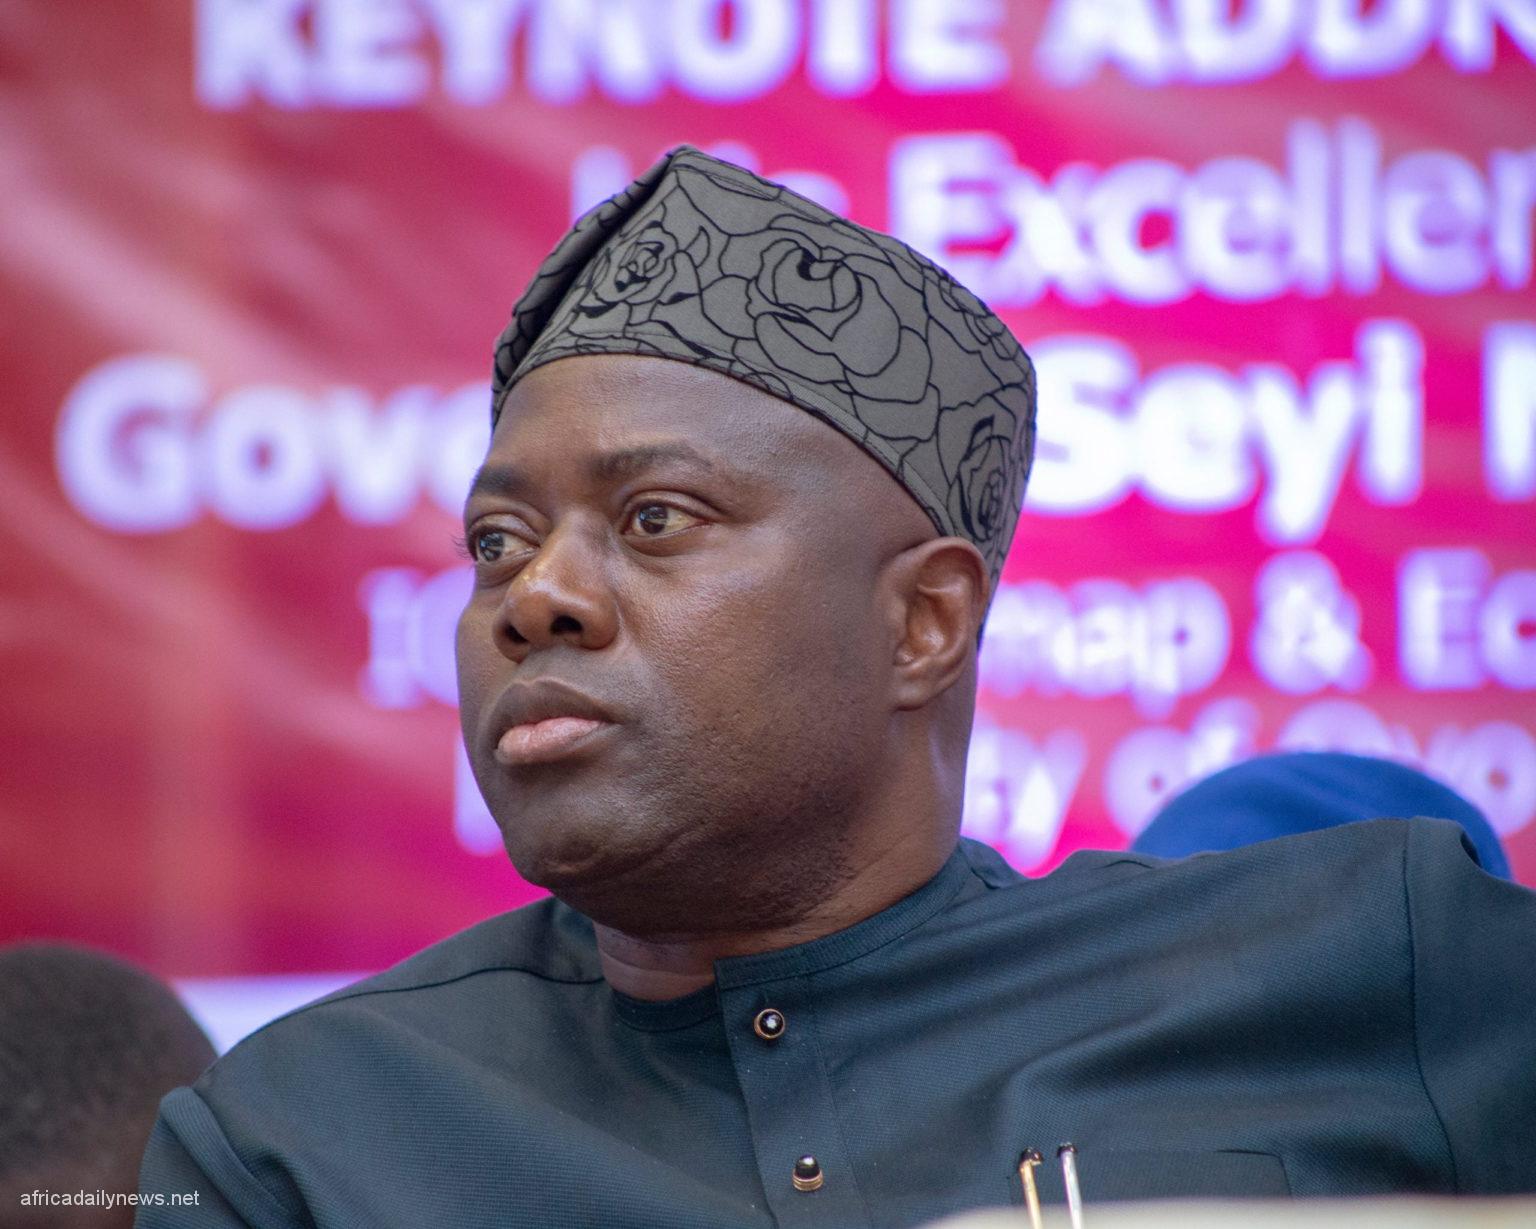 Osun: Power Resides With The People - Makinde Warns Govs